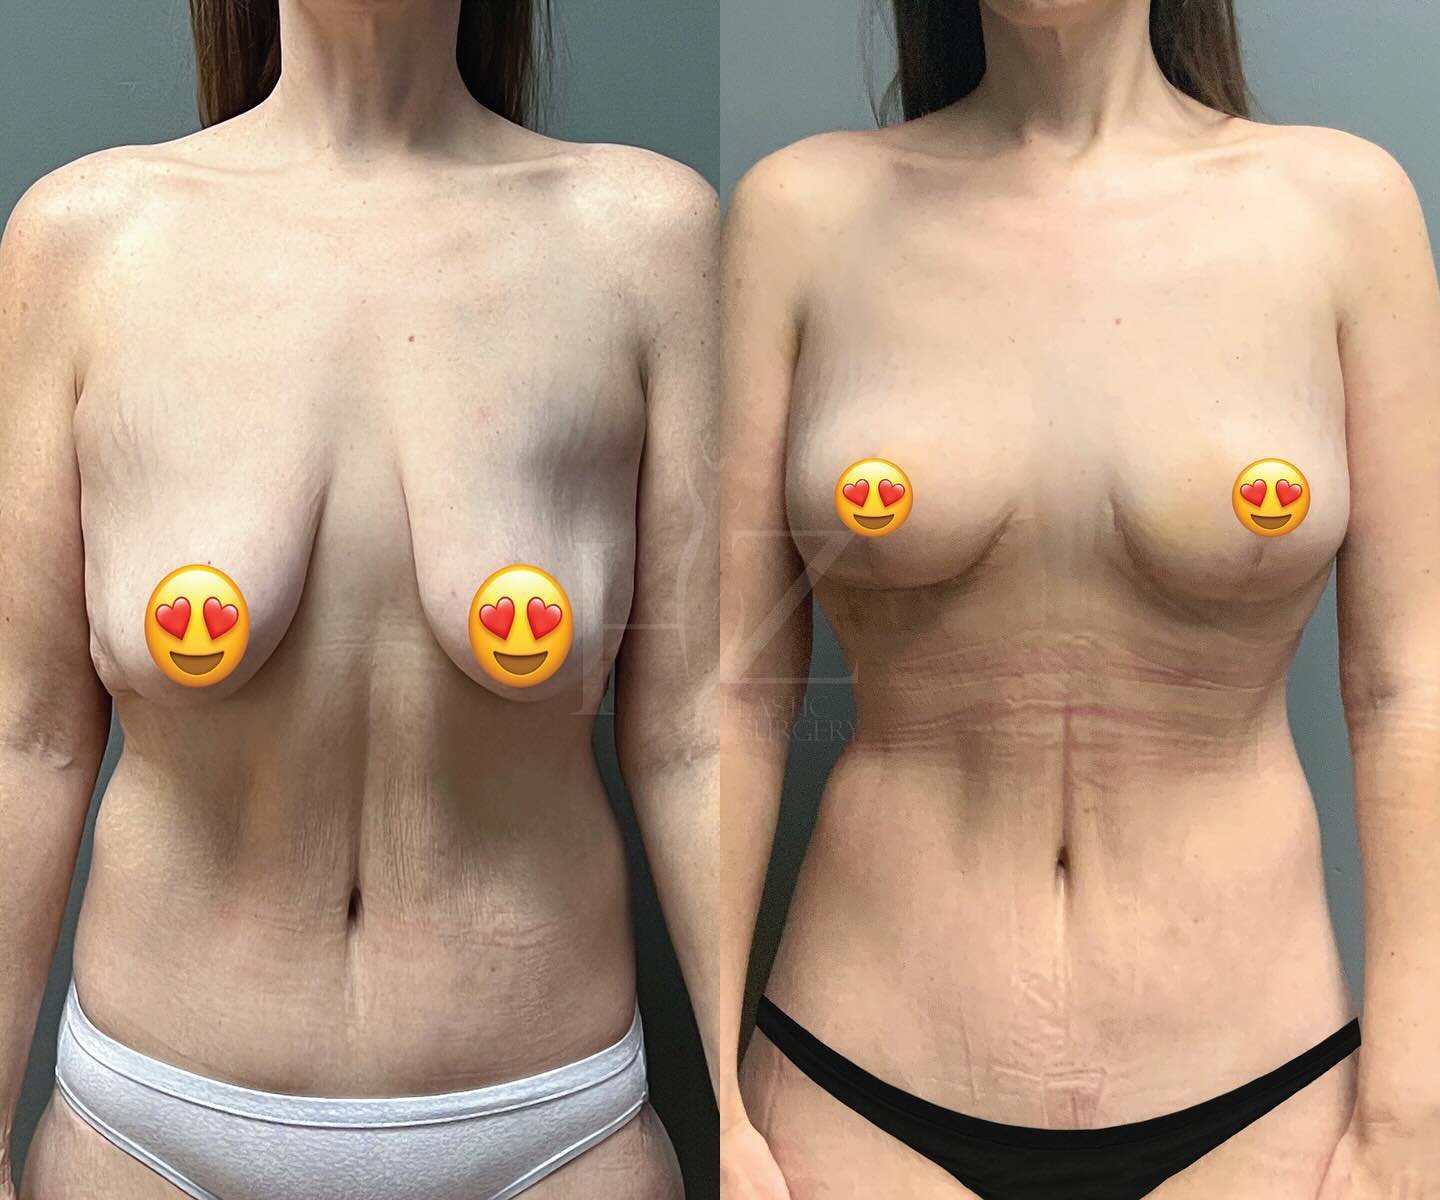 Breast lift after 200lb weight loss 🔥 
@drzhzps performed a breast lift with liposuction on the waist on our beautiful patient to achieve this natural-looking result. No implants involved! Results are 6 weeks post-op.

𝐏𝐫𝐞-𝐎𝐩 𝐒𝐭𝐚𝐭𝐬:
Age: 4